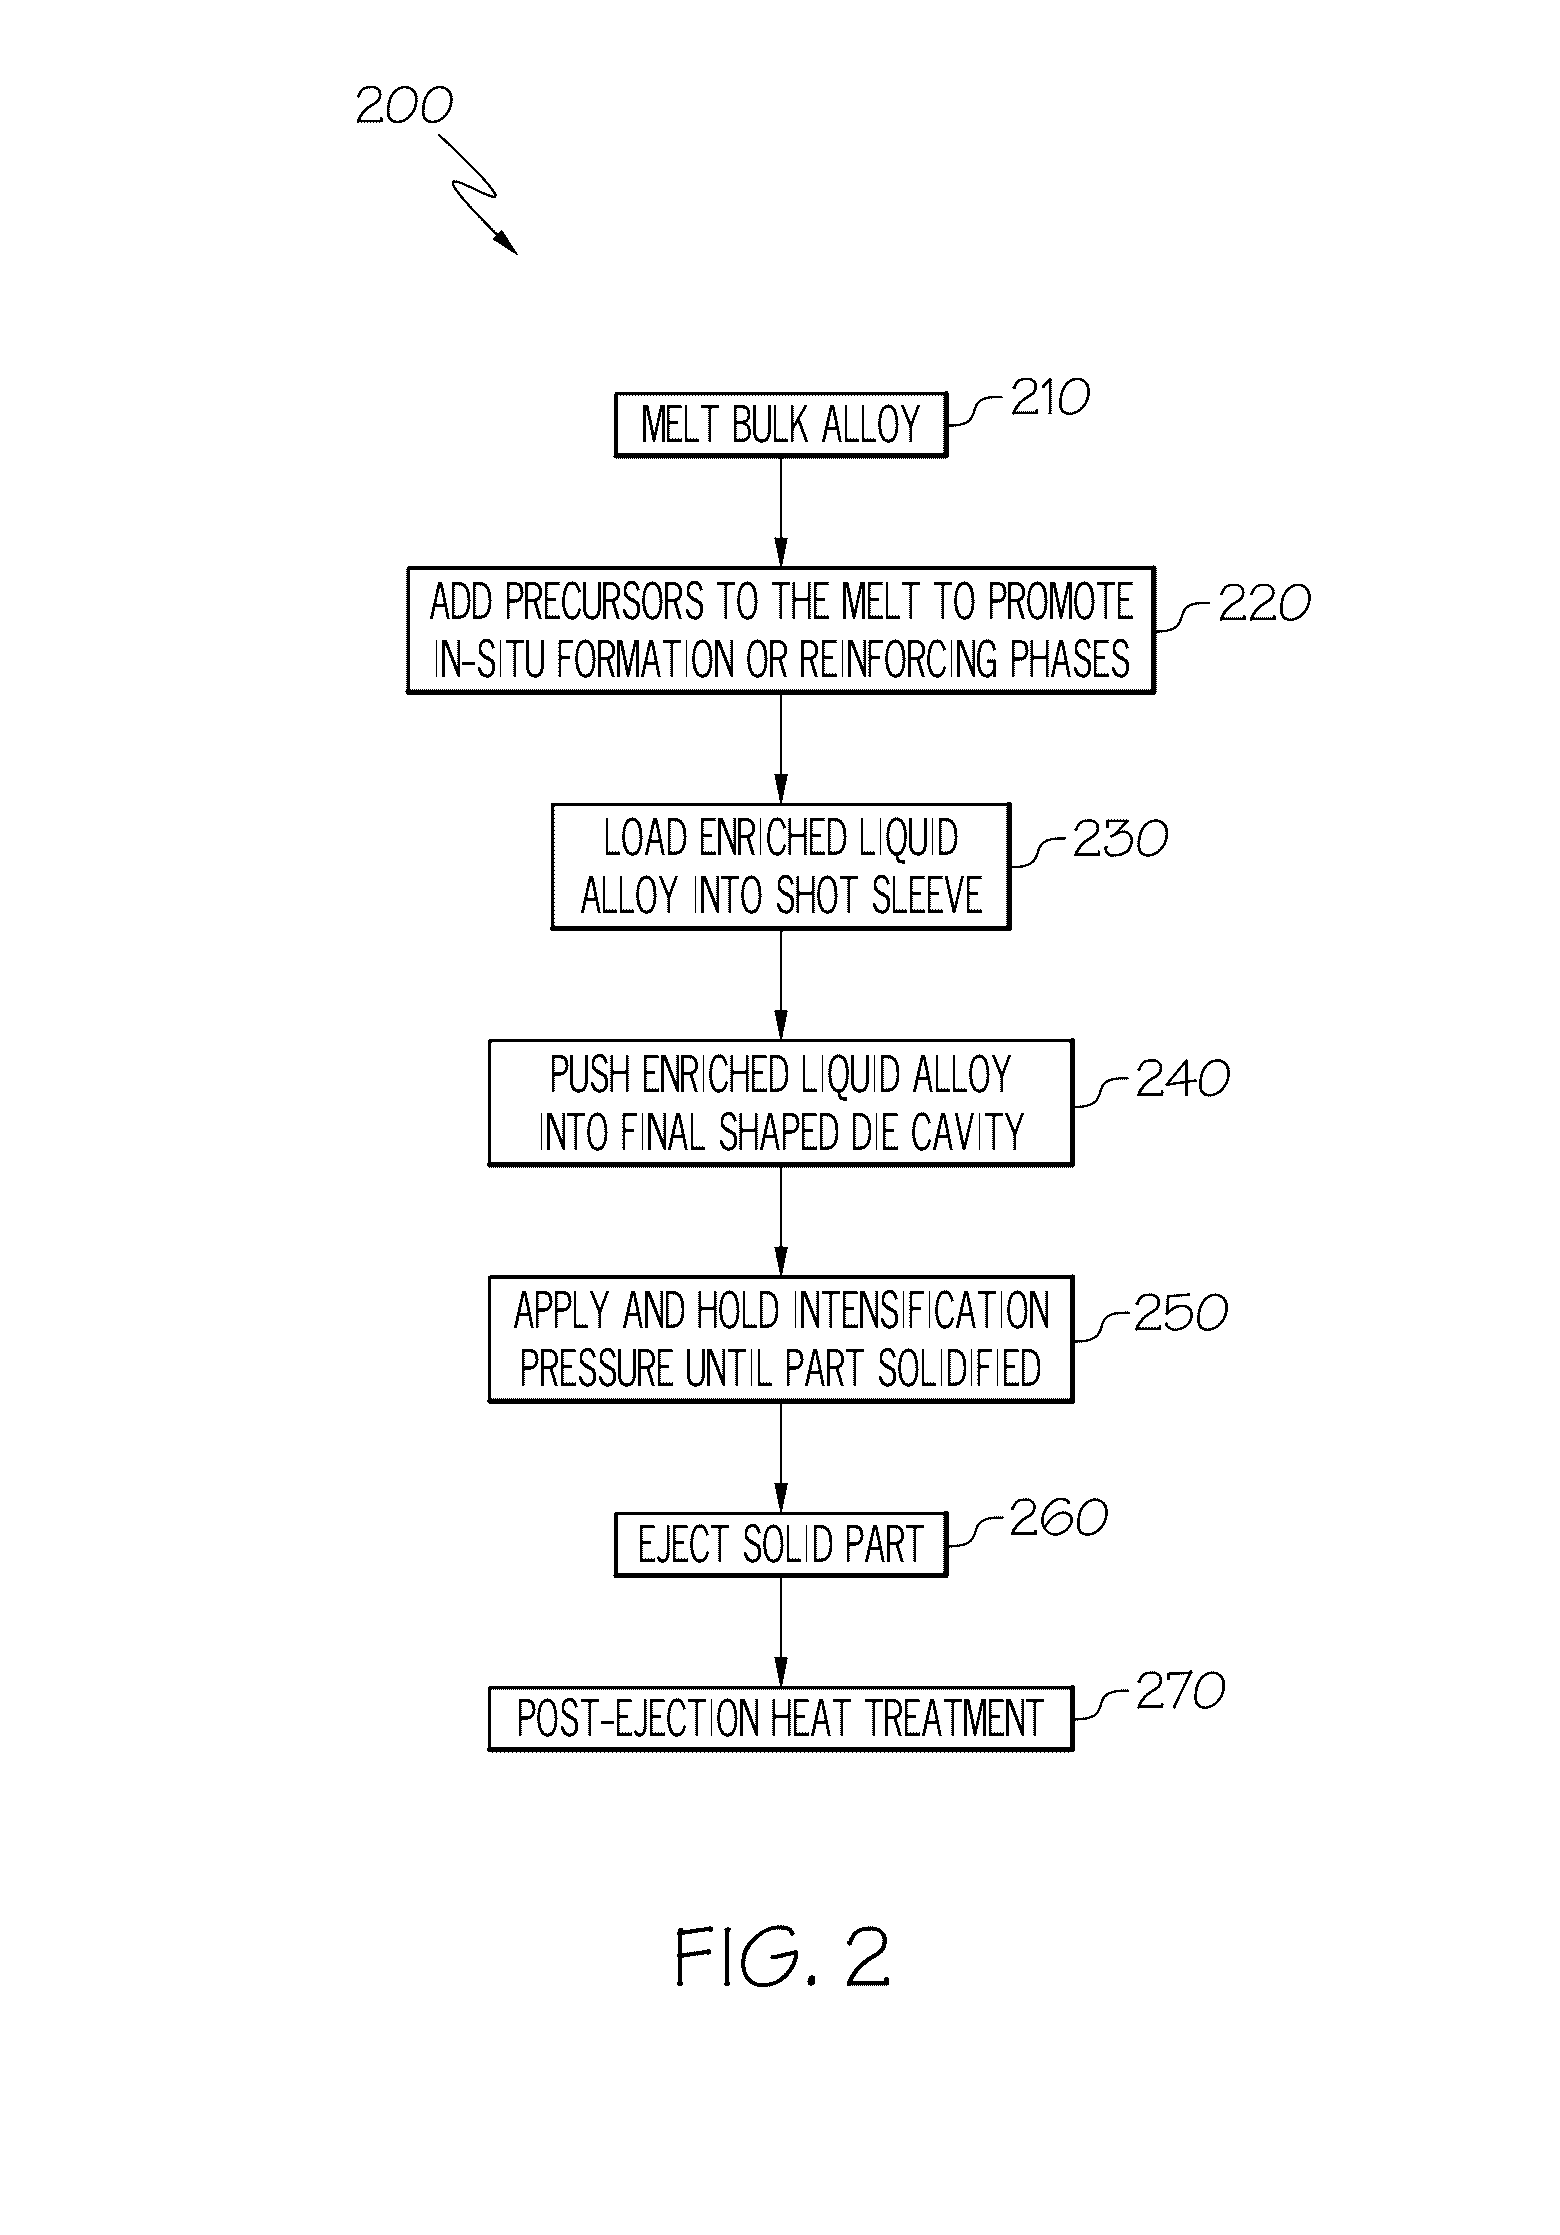 Method of Making Aluminum or Magnesium Based Composite Engine Blocks or Other Parts With In-Situ Formed Reinforced Phases Through Squeeze Casting or Semi-Solid Metal Forming and Post Heat Treatment